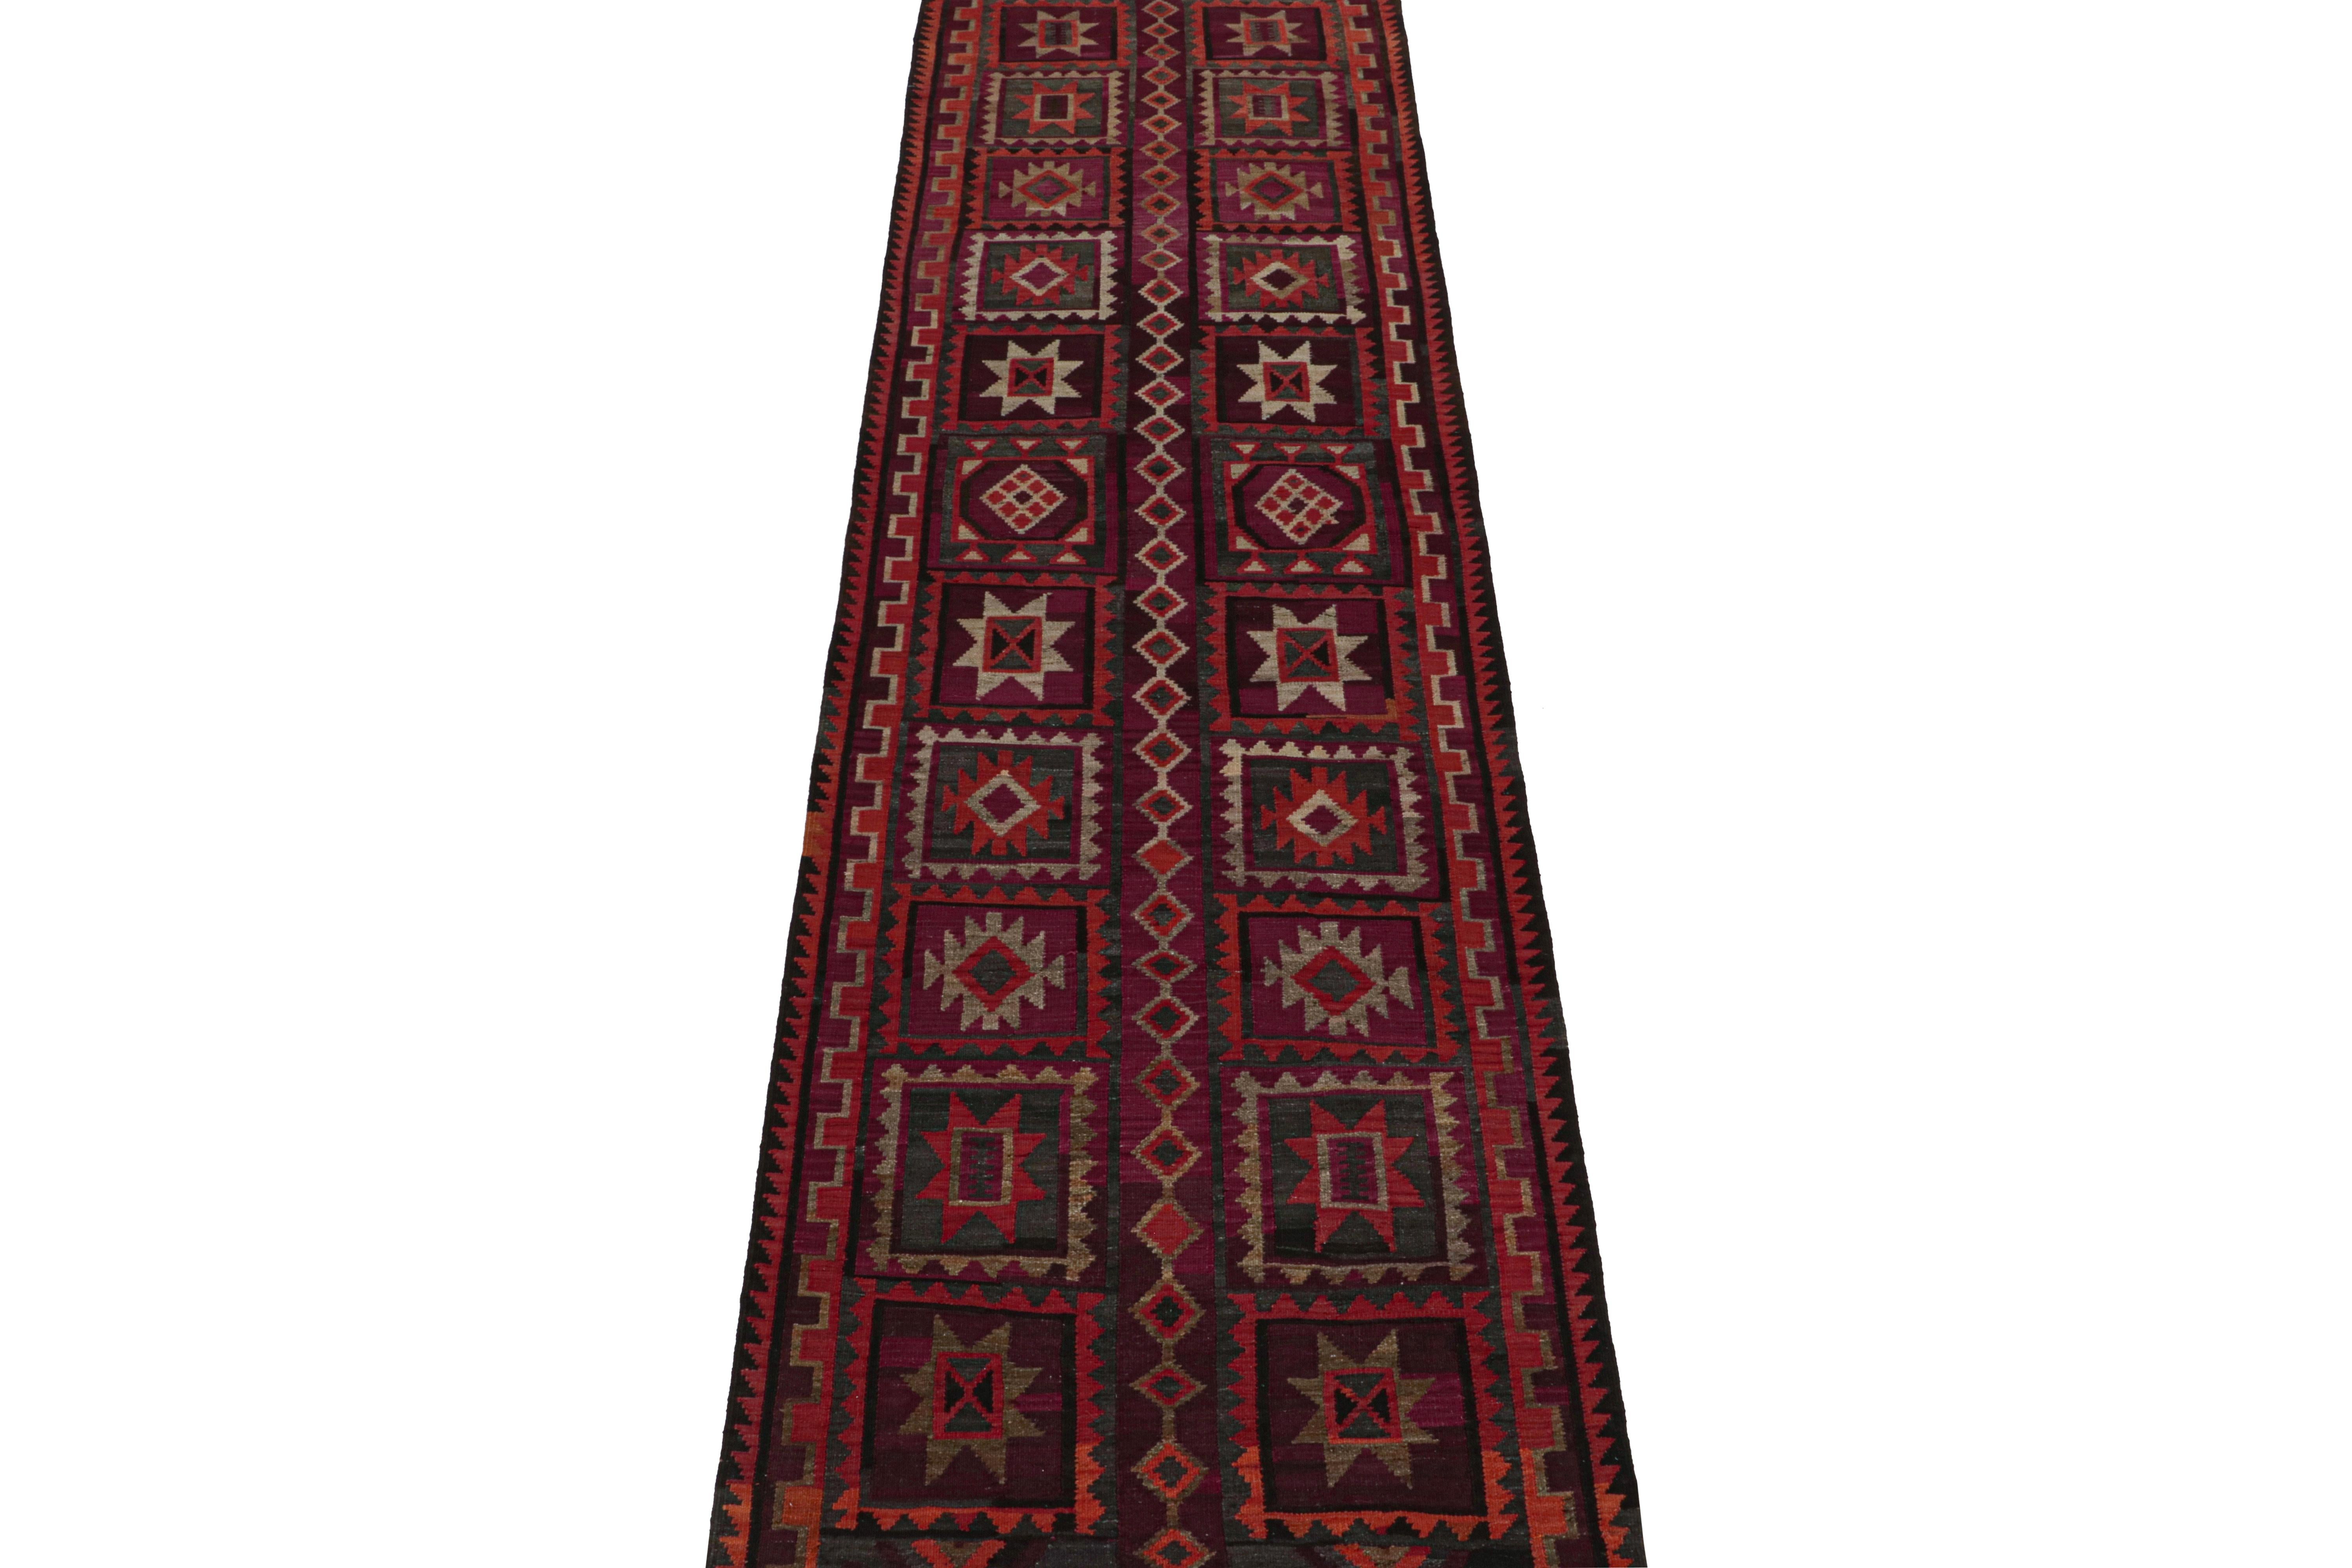 This vintage 4x13 Shahsavan Persian Kilim is handwoven in wool, and originates circa 1950-1960.

On the Design: 

This rich piece enjoys tribal patterns in the most interesting use of Classic colors. A keen eye will note a bordeaux kind of